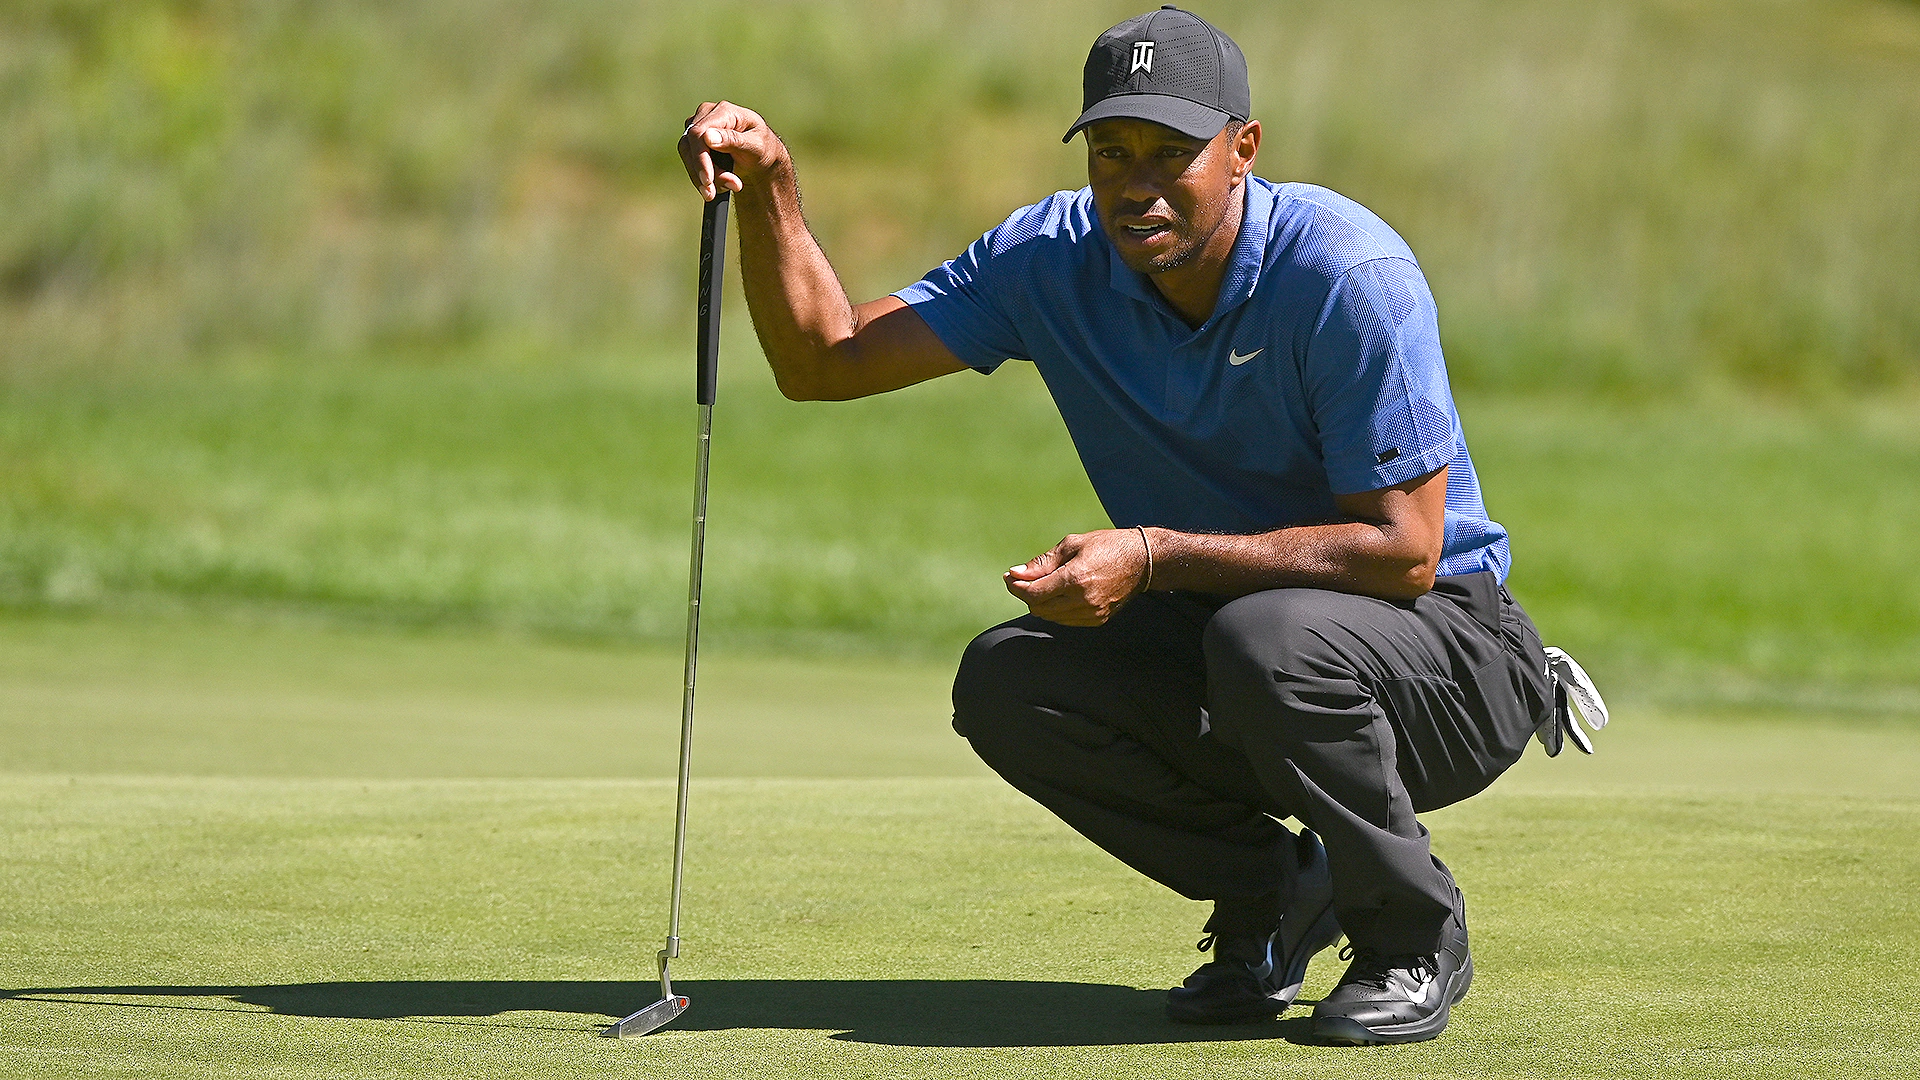 ‘Stubborn’ Tiger Woods competing with old Scotty Cameron, practicing with others